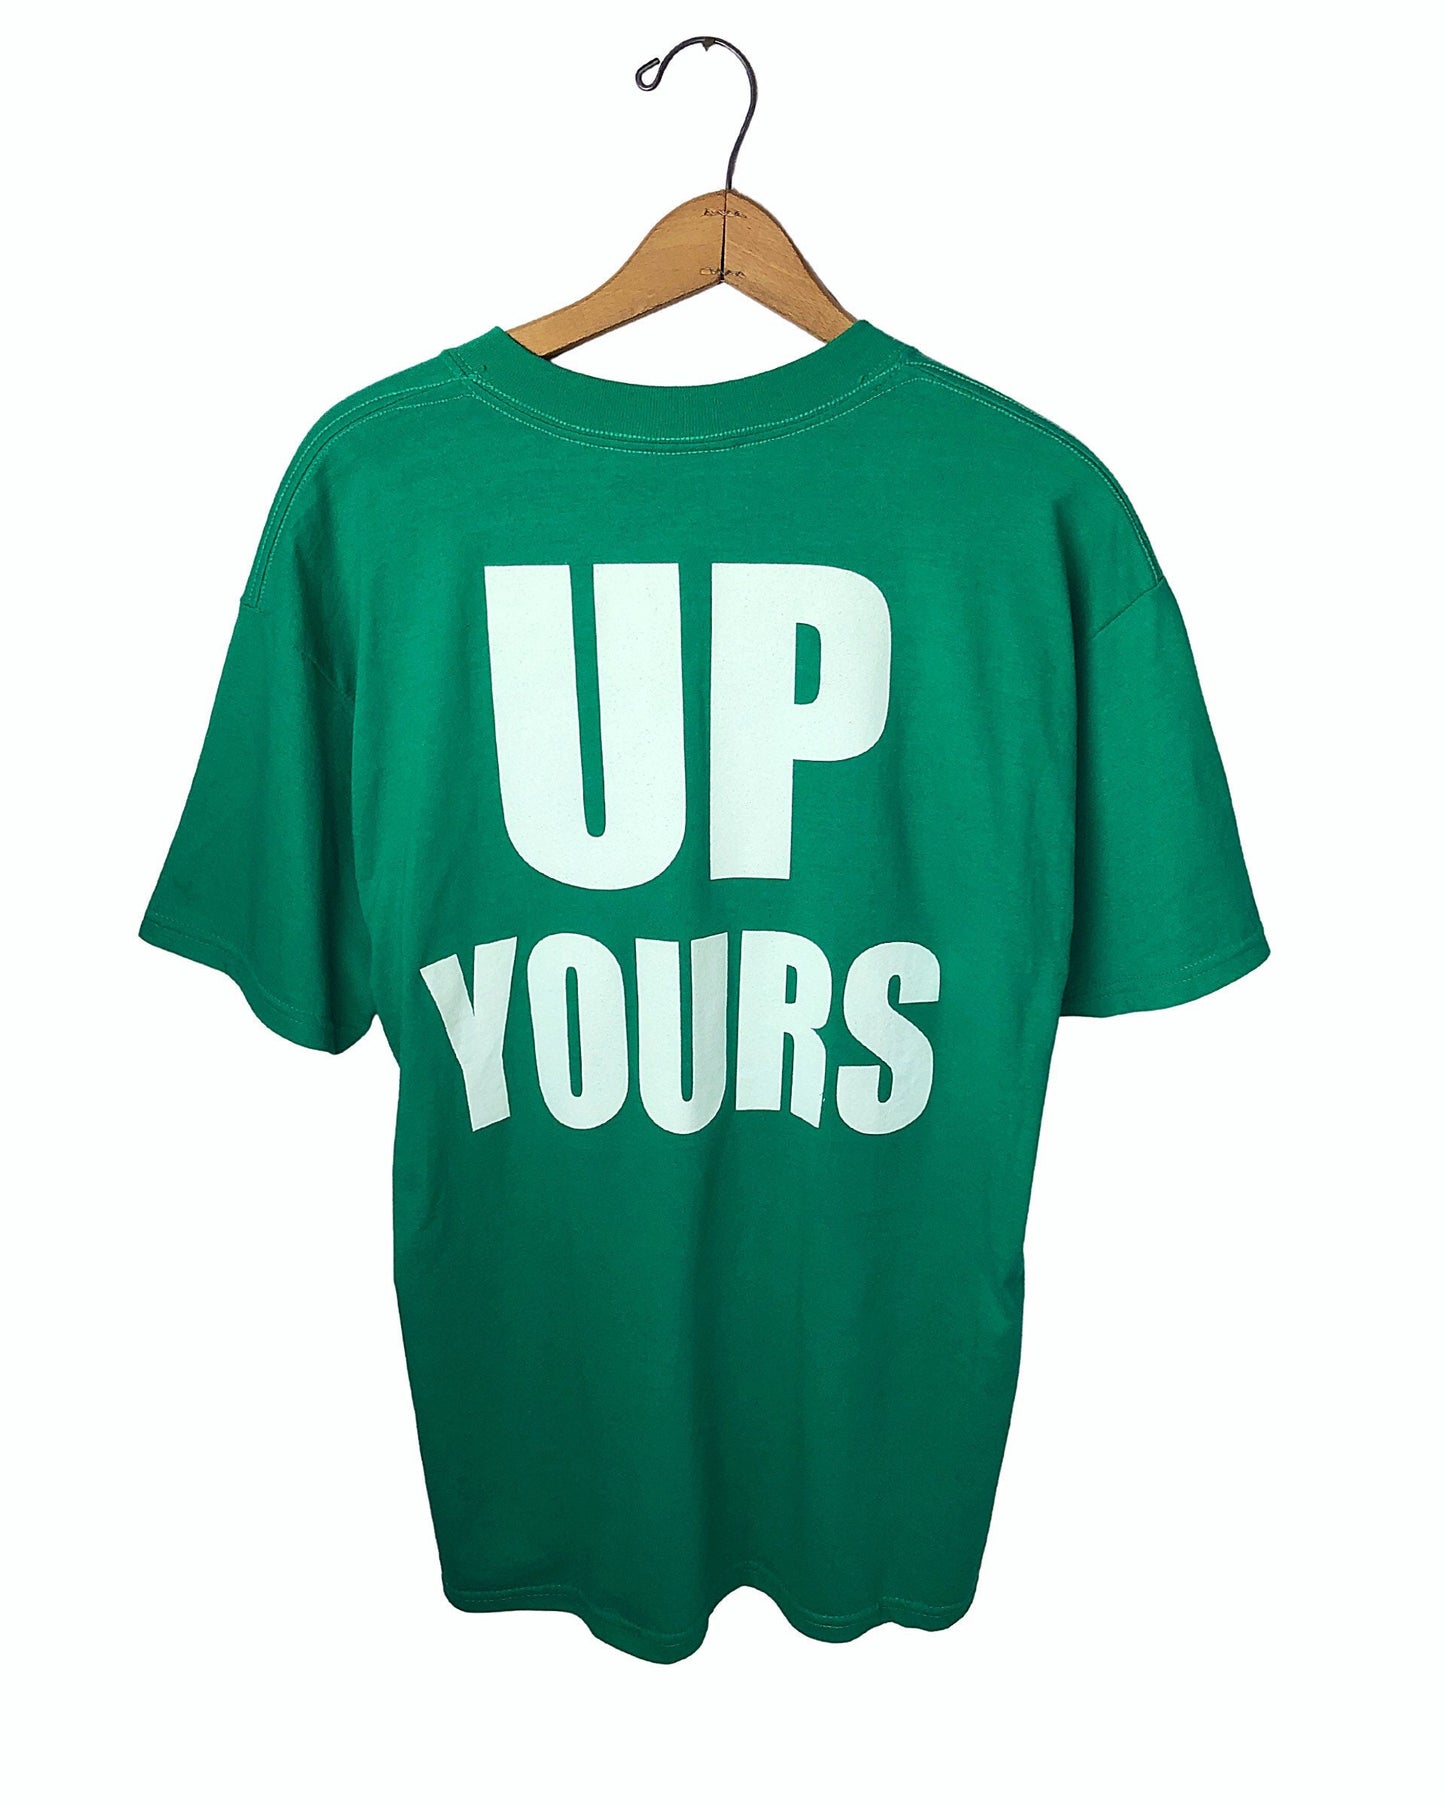 Vintage Whazzz..UP YOURS! Funny 90’s Commercial Budweiser x 7UP Gildan T-shirt Size Large DEADSTOCK